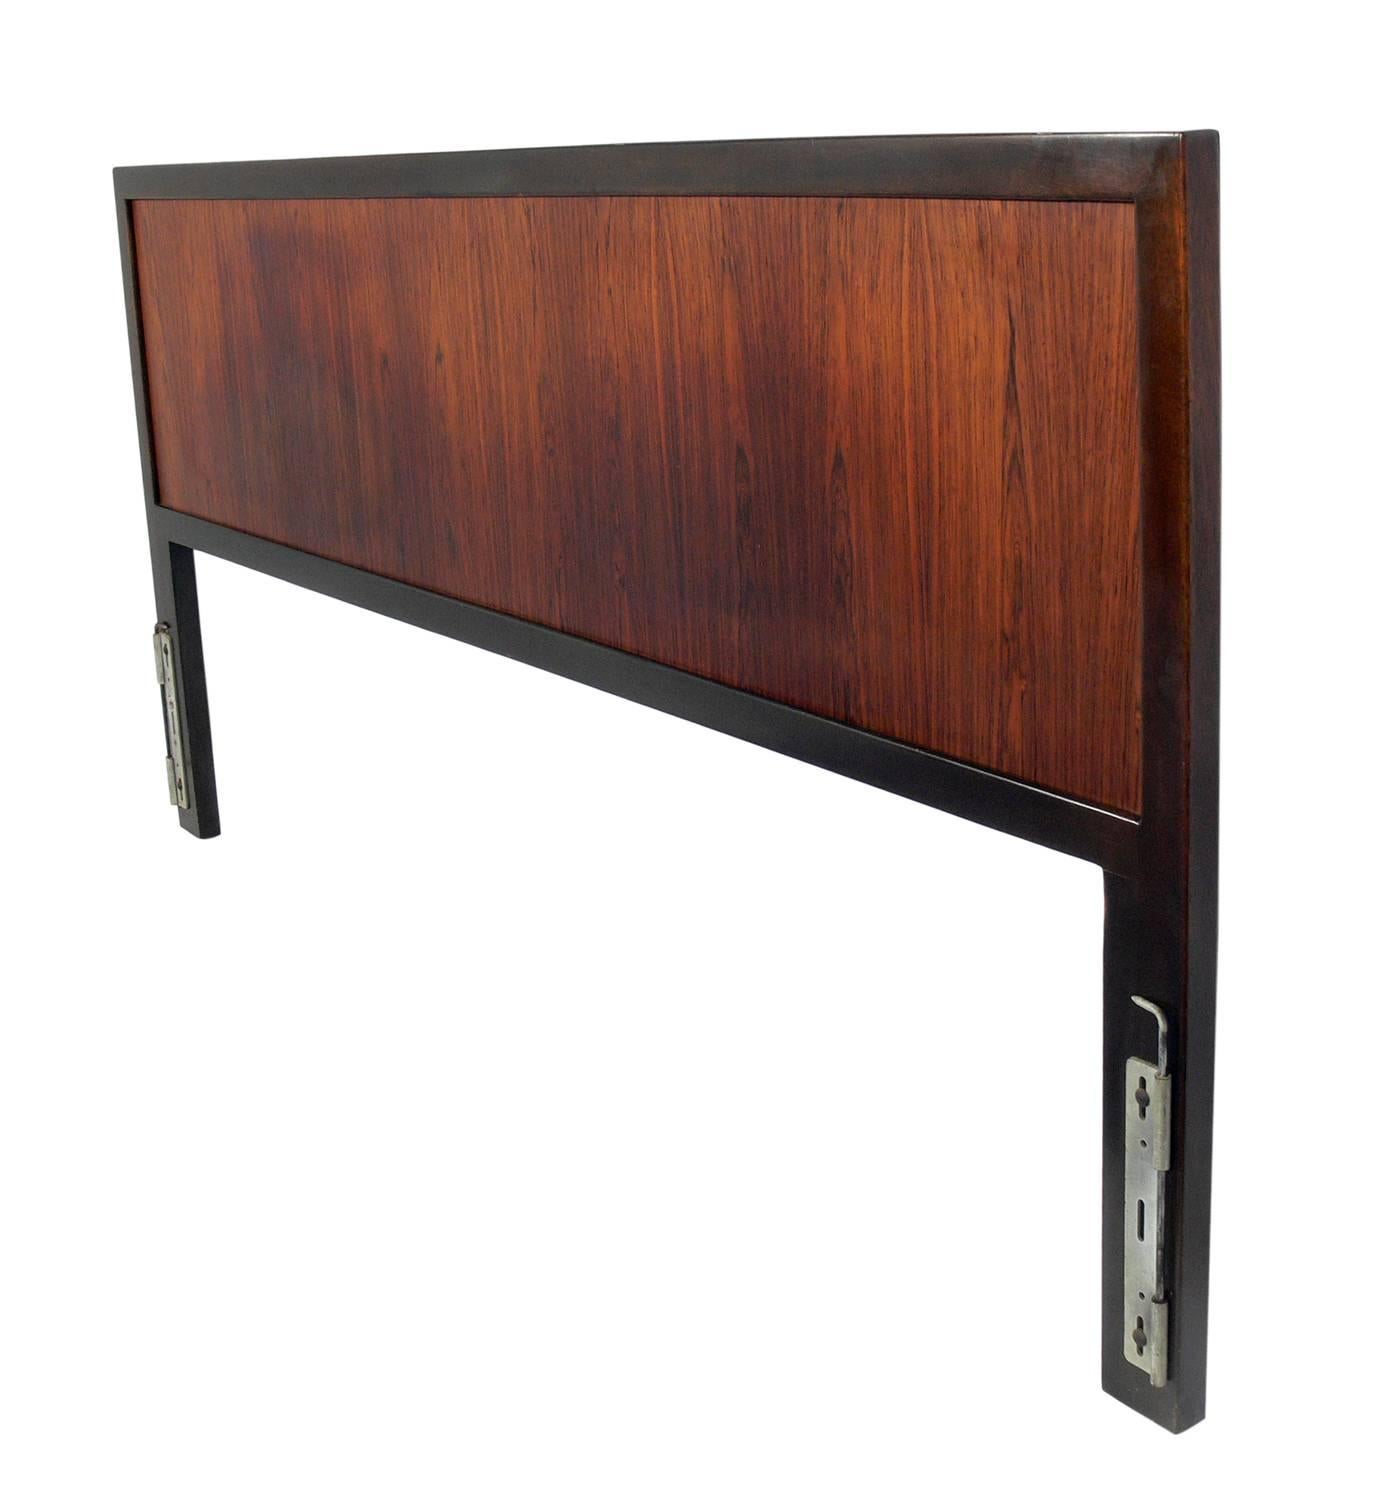 Clean lined rosewood and mahogany headboard, designed by Harvey Probber, American, circa 1960s. This piece is currently being refinished and will look incredible when it's completed. This headboard fits a king-size US mattress and can be used with a